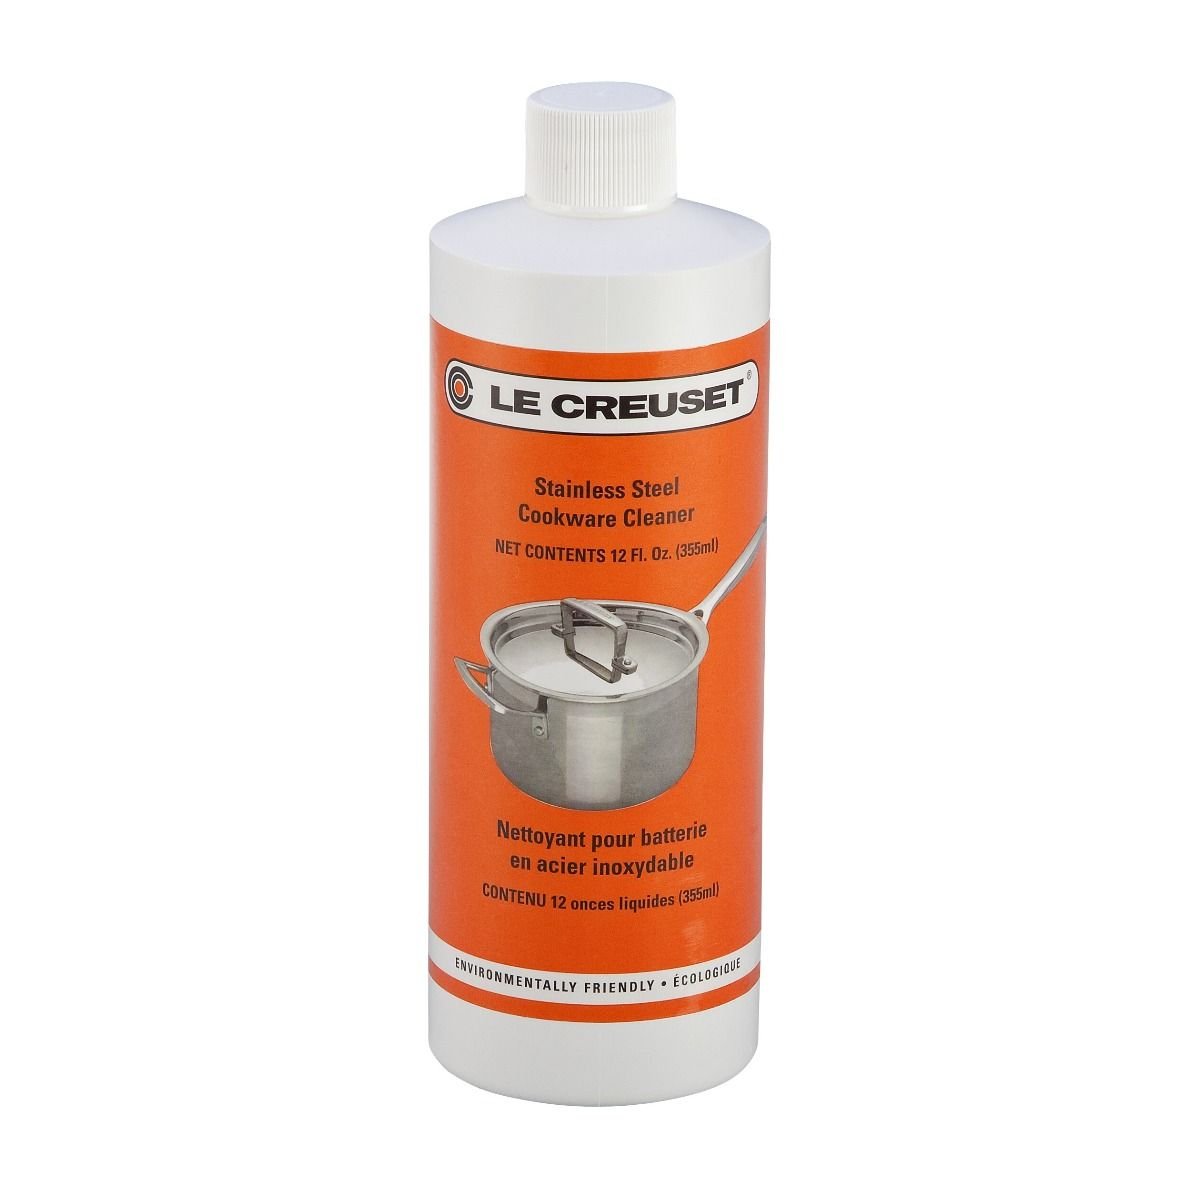 Le Creuset ecological cleaner and protector for enamelled cast iron cooking  utensils, 250 ml, 71039,  price tracker / tracking,  price  history charts,  price watches,  price drop alerts